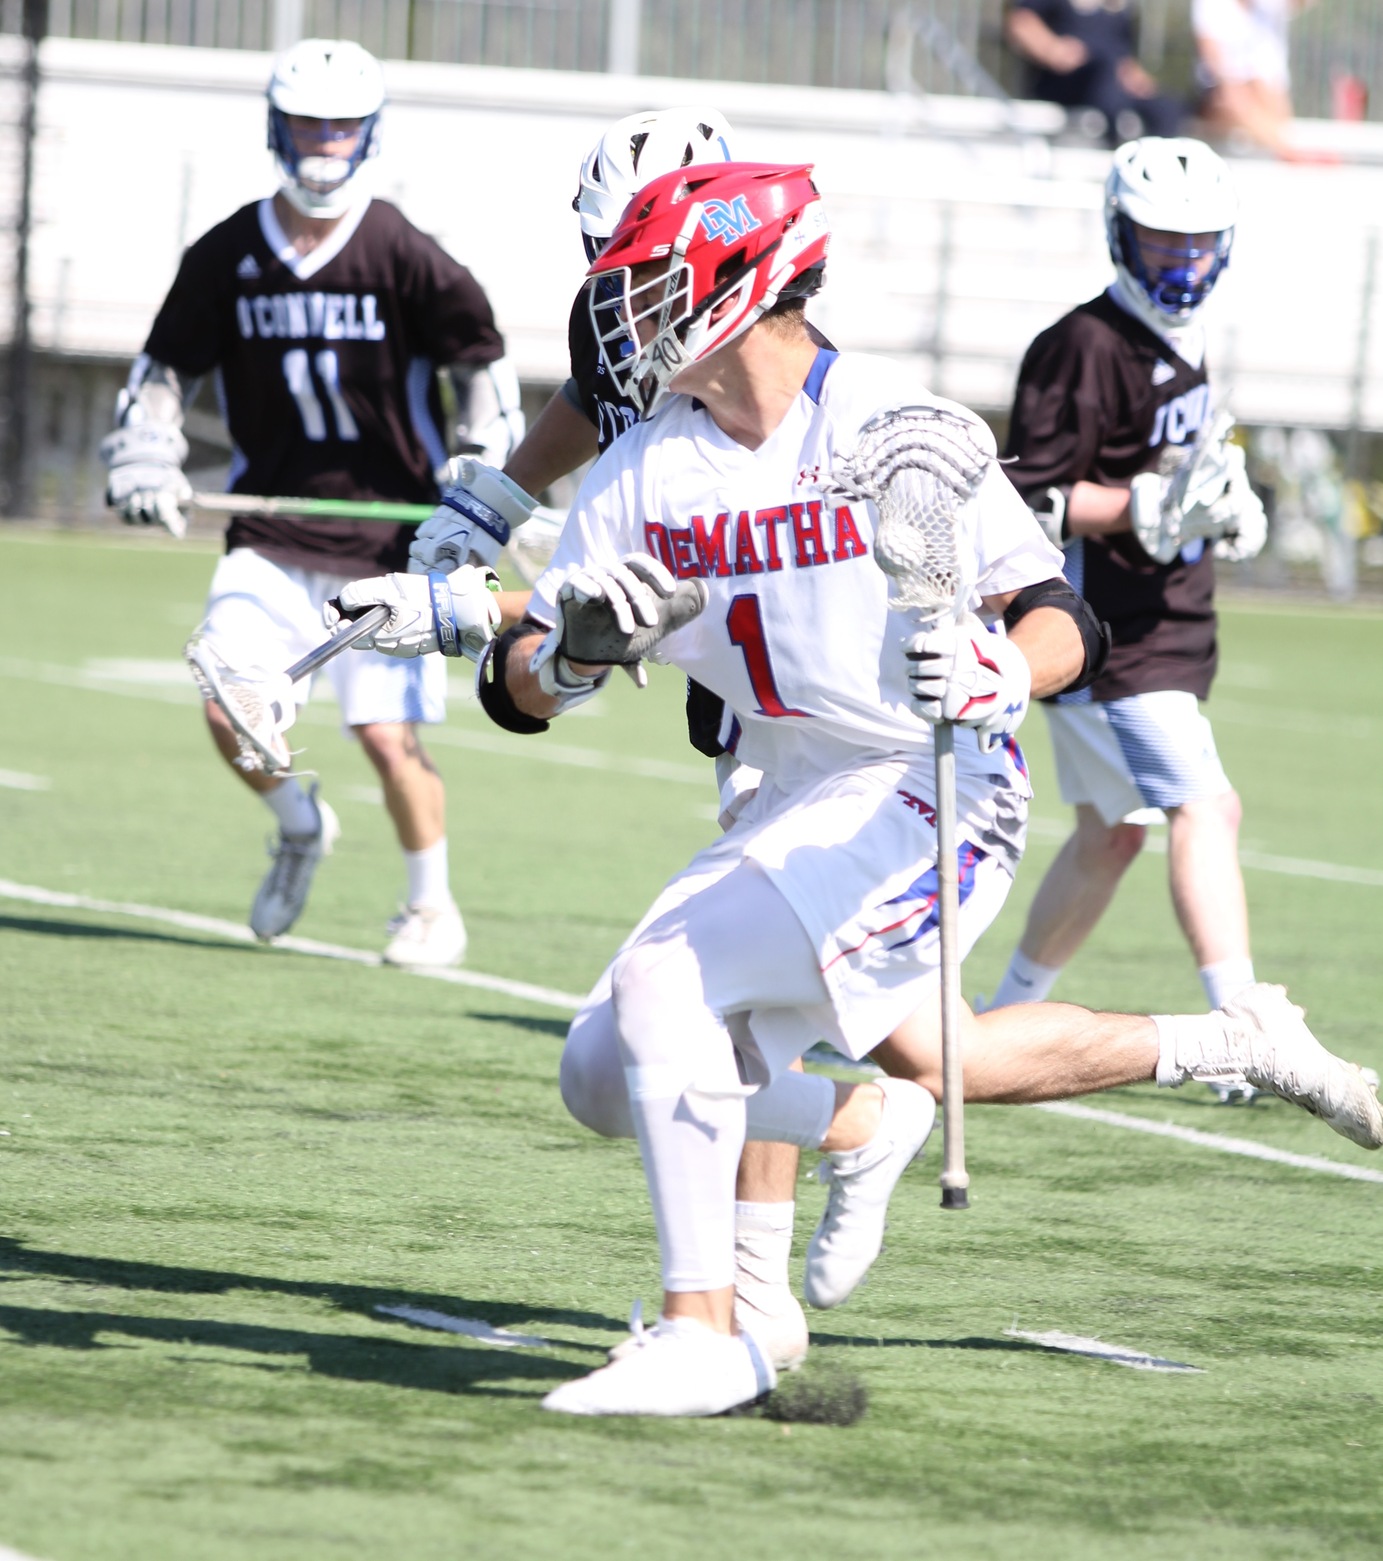 The conference is now 5-6 teams deep and producing talent that will be playing high level Division 1 Lacrosse, like Garrett Leadmon (DeMatha) who will be attending Duke University next year.